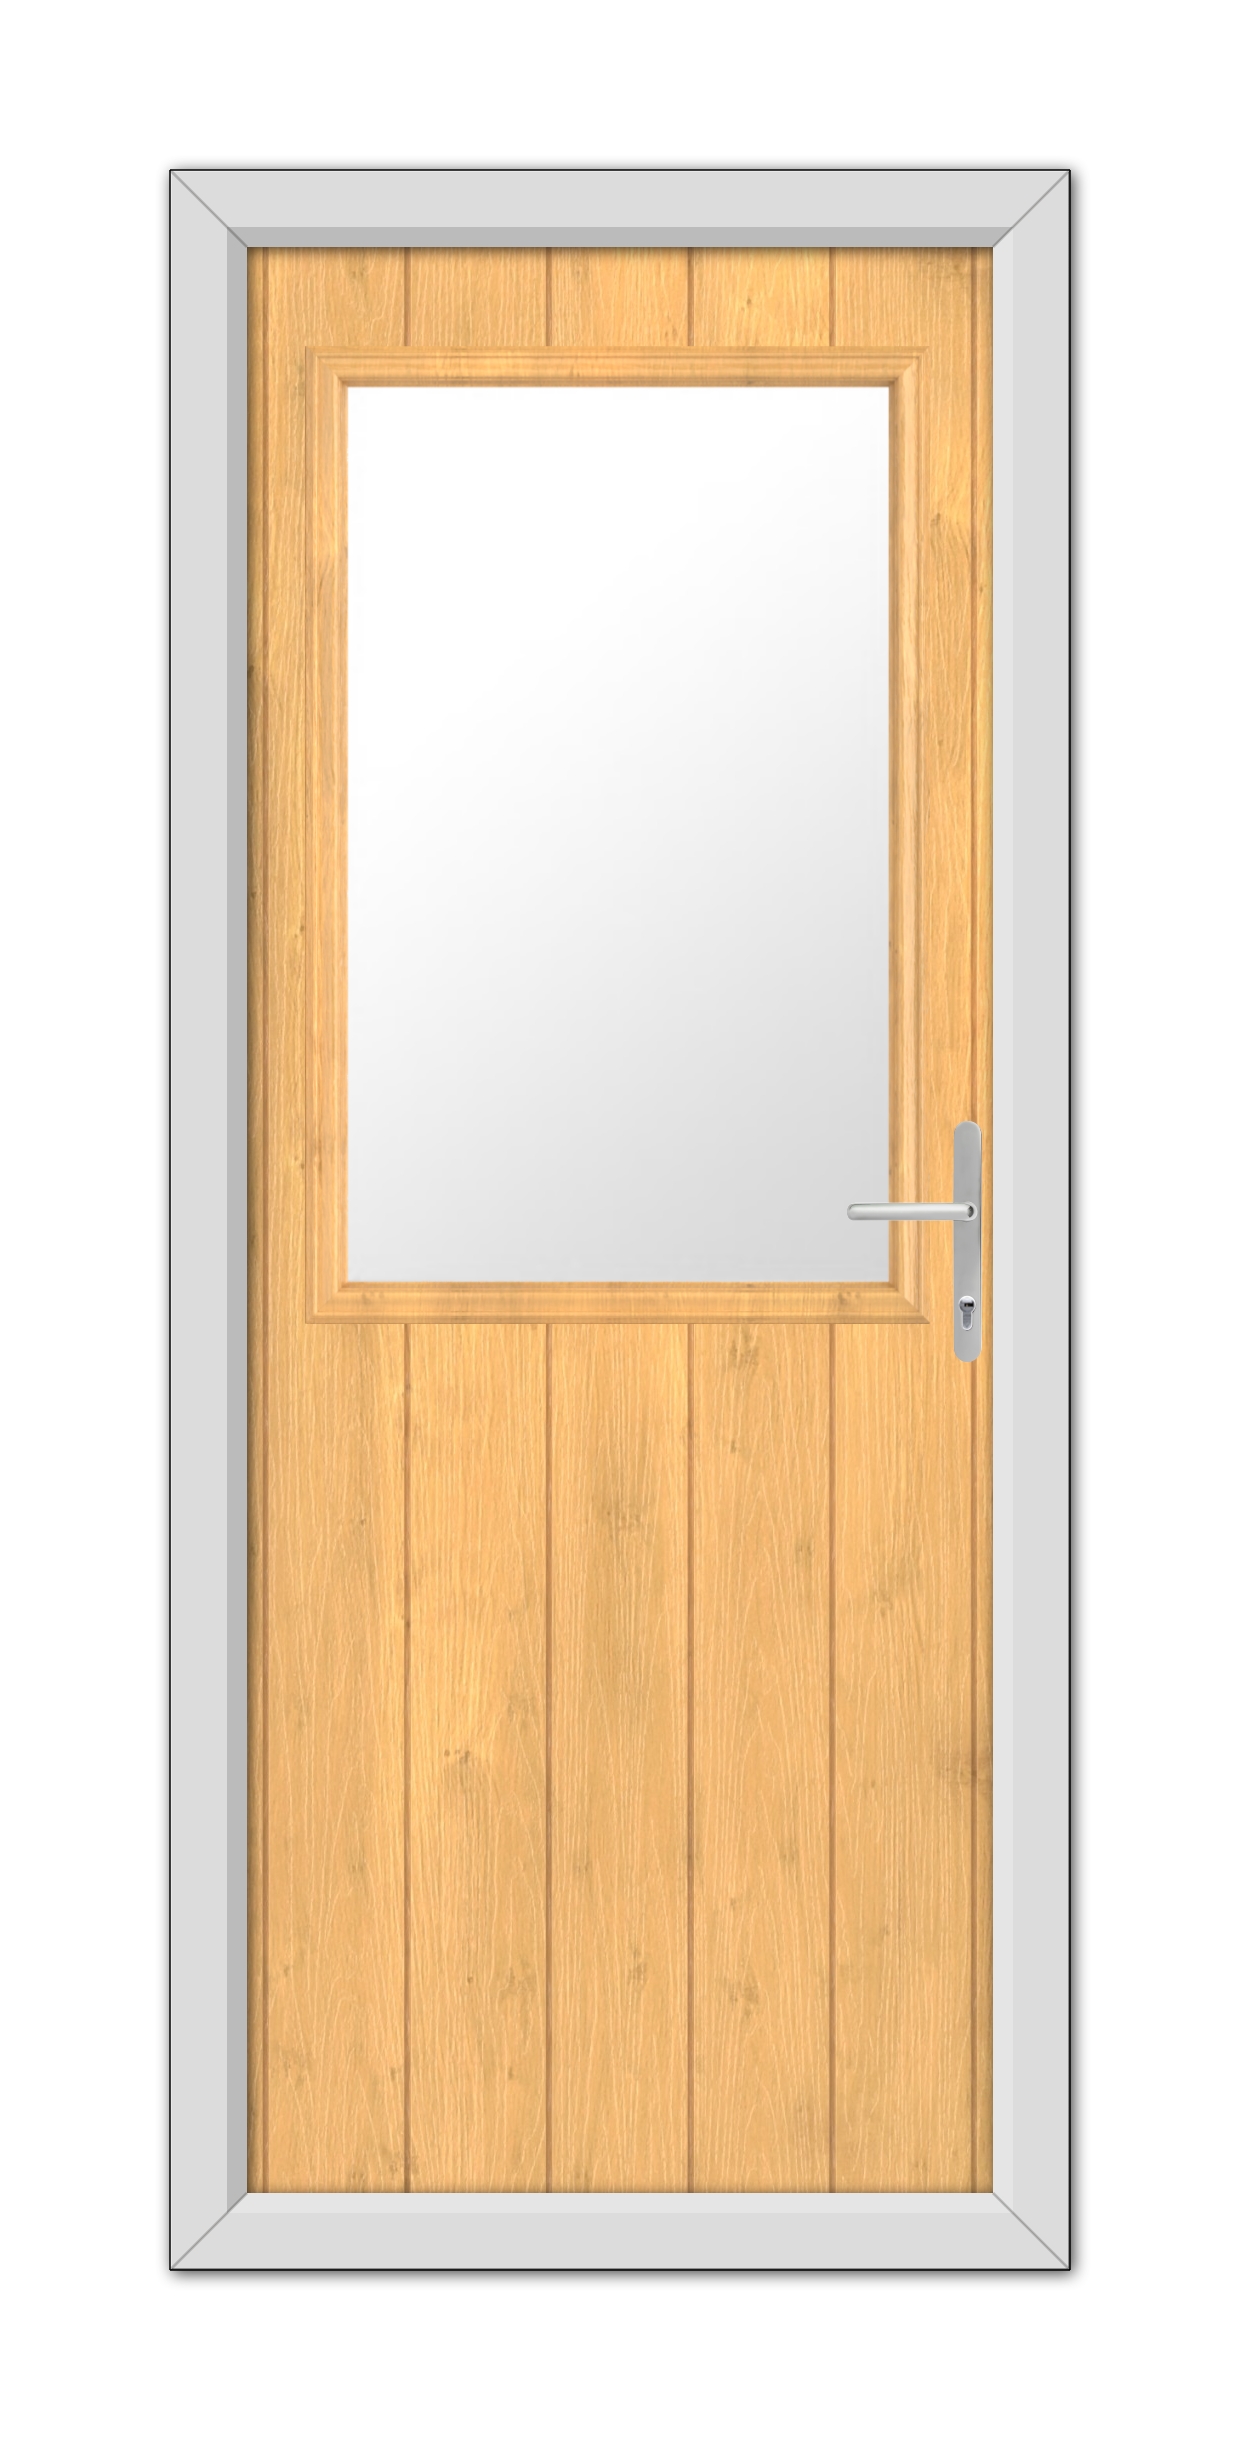 A modern Irish Oak Clifton Composite Door 48mm Timber Core with a square glass window, framed in grey metal and equipped with a silver handle.